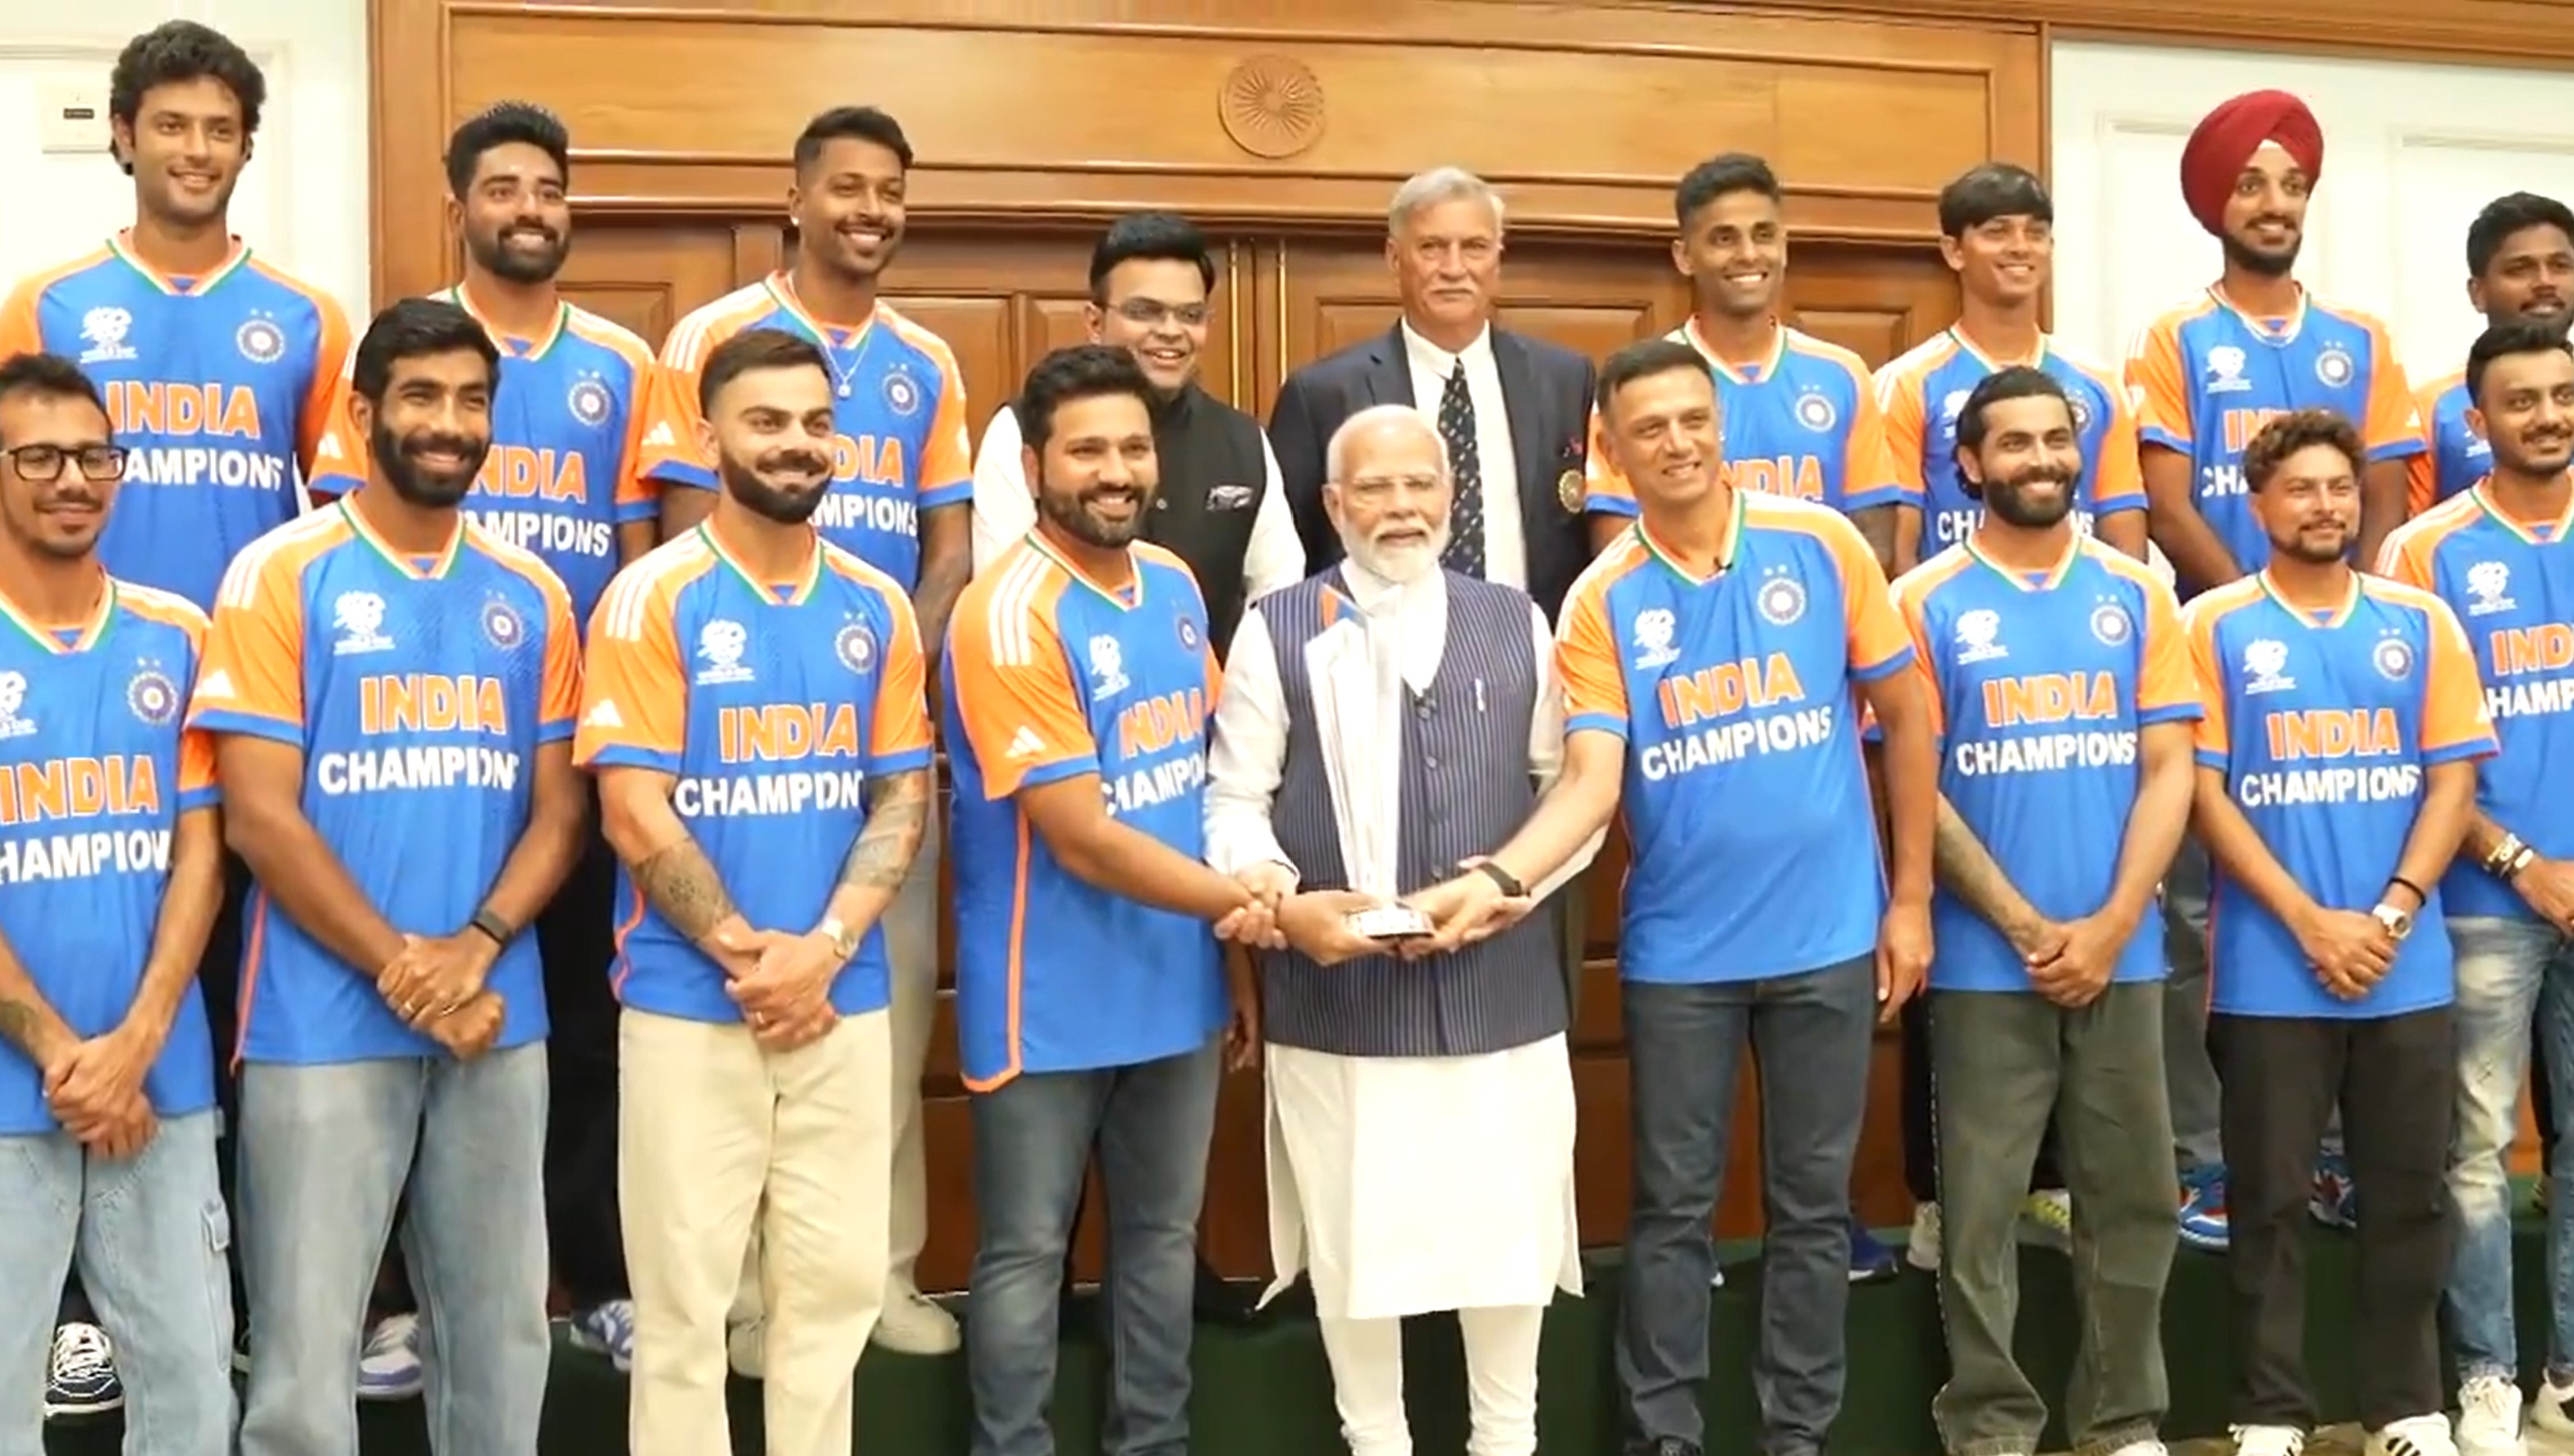 PM Narendra Modi hosted the T20 World Champs for a breakfast at his residence in Delhi | ANI